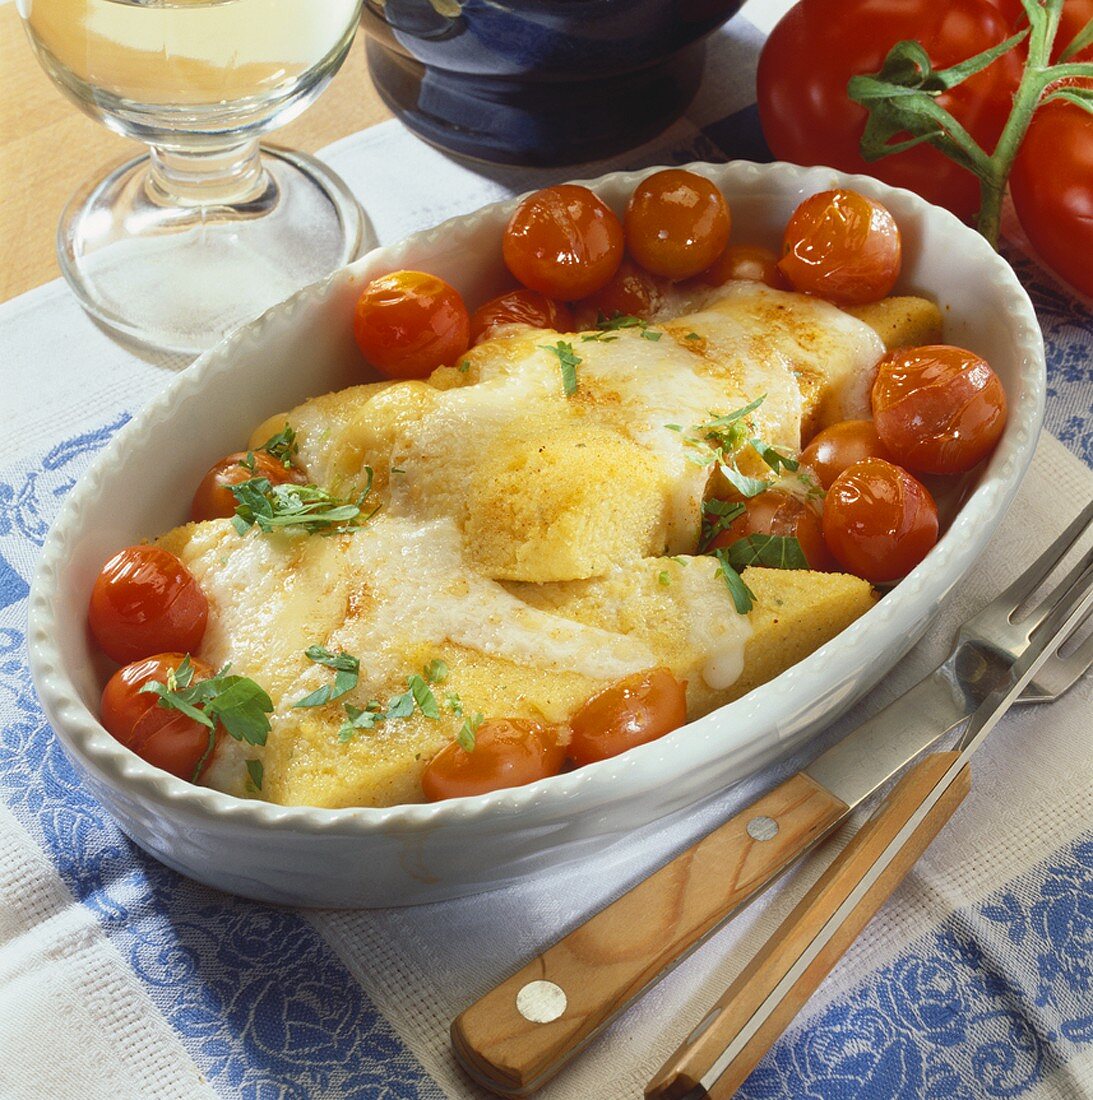 Baked polenta slices with cherry tomatoes and cheese